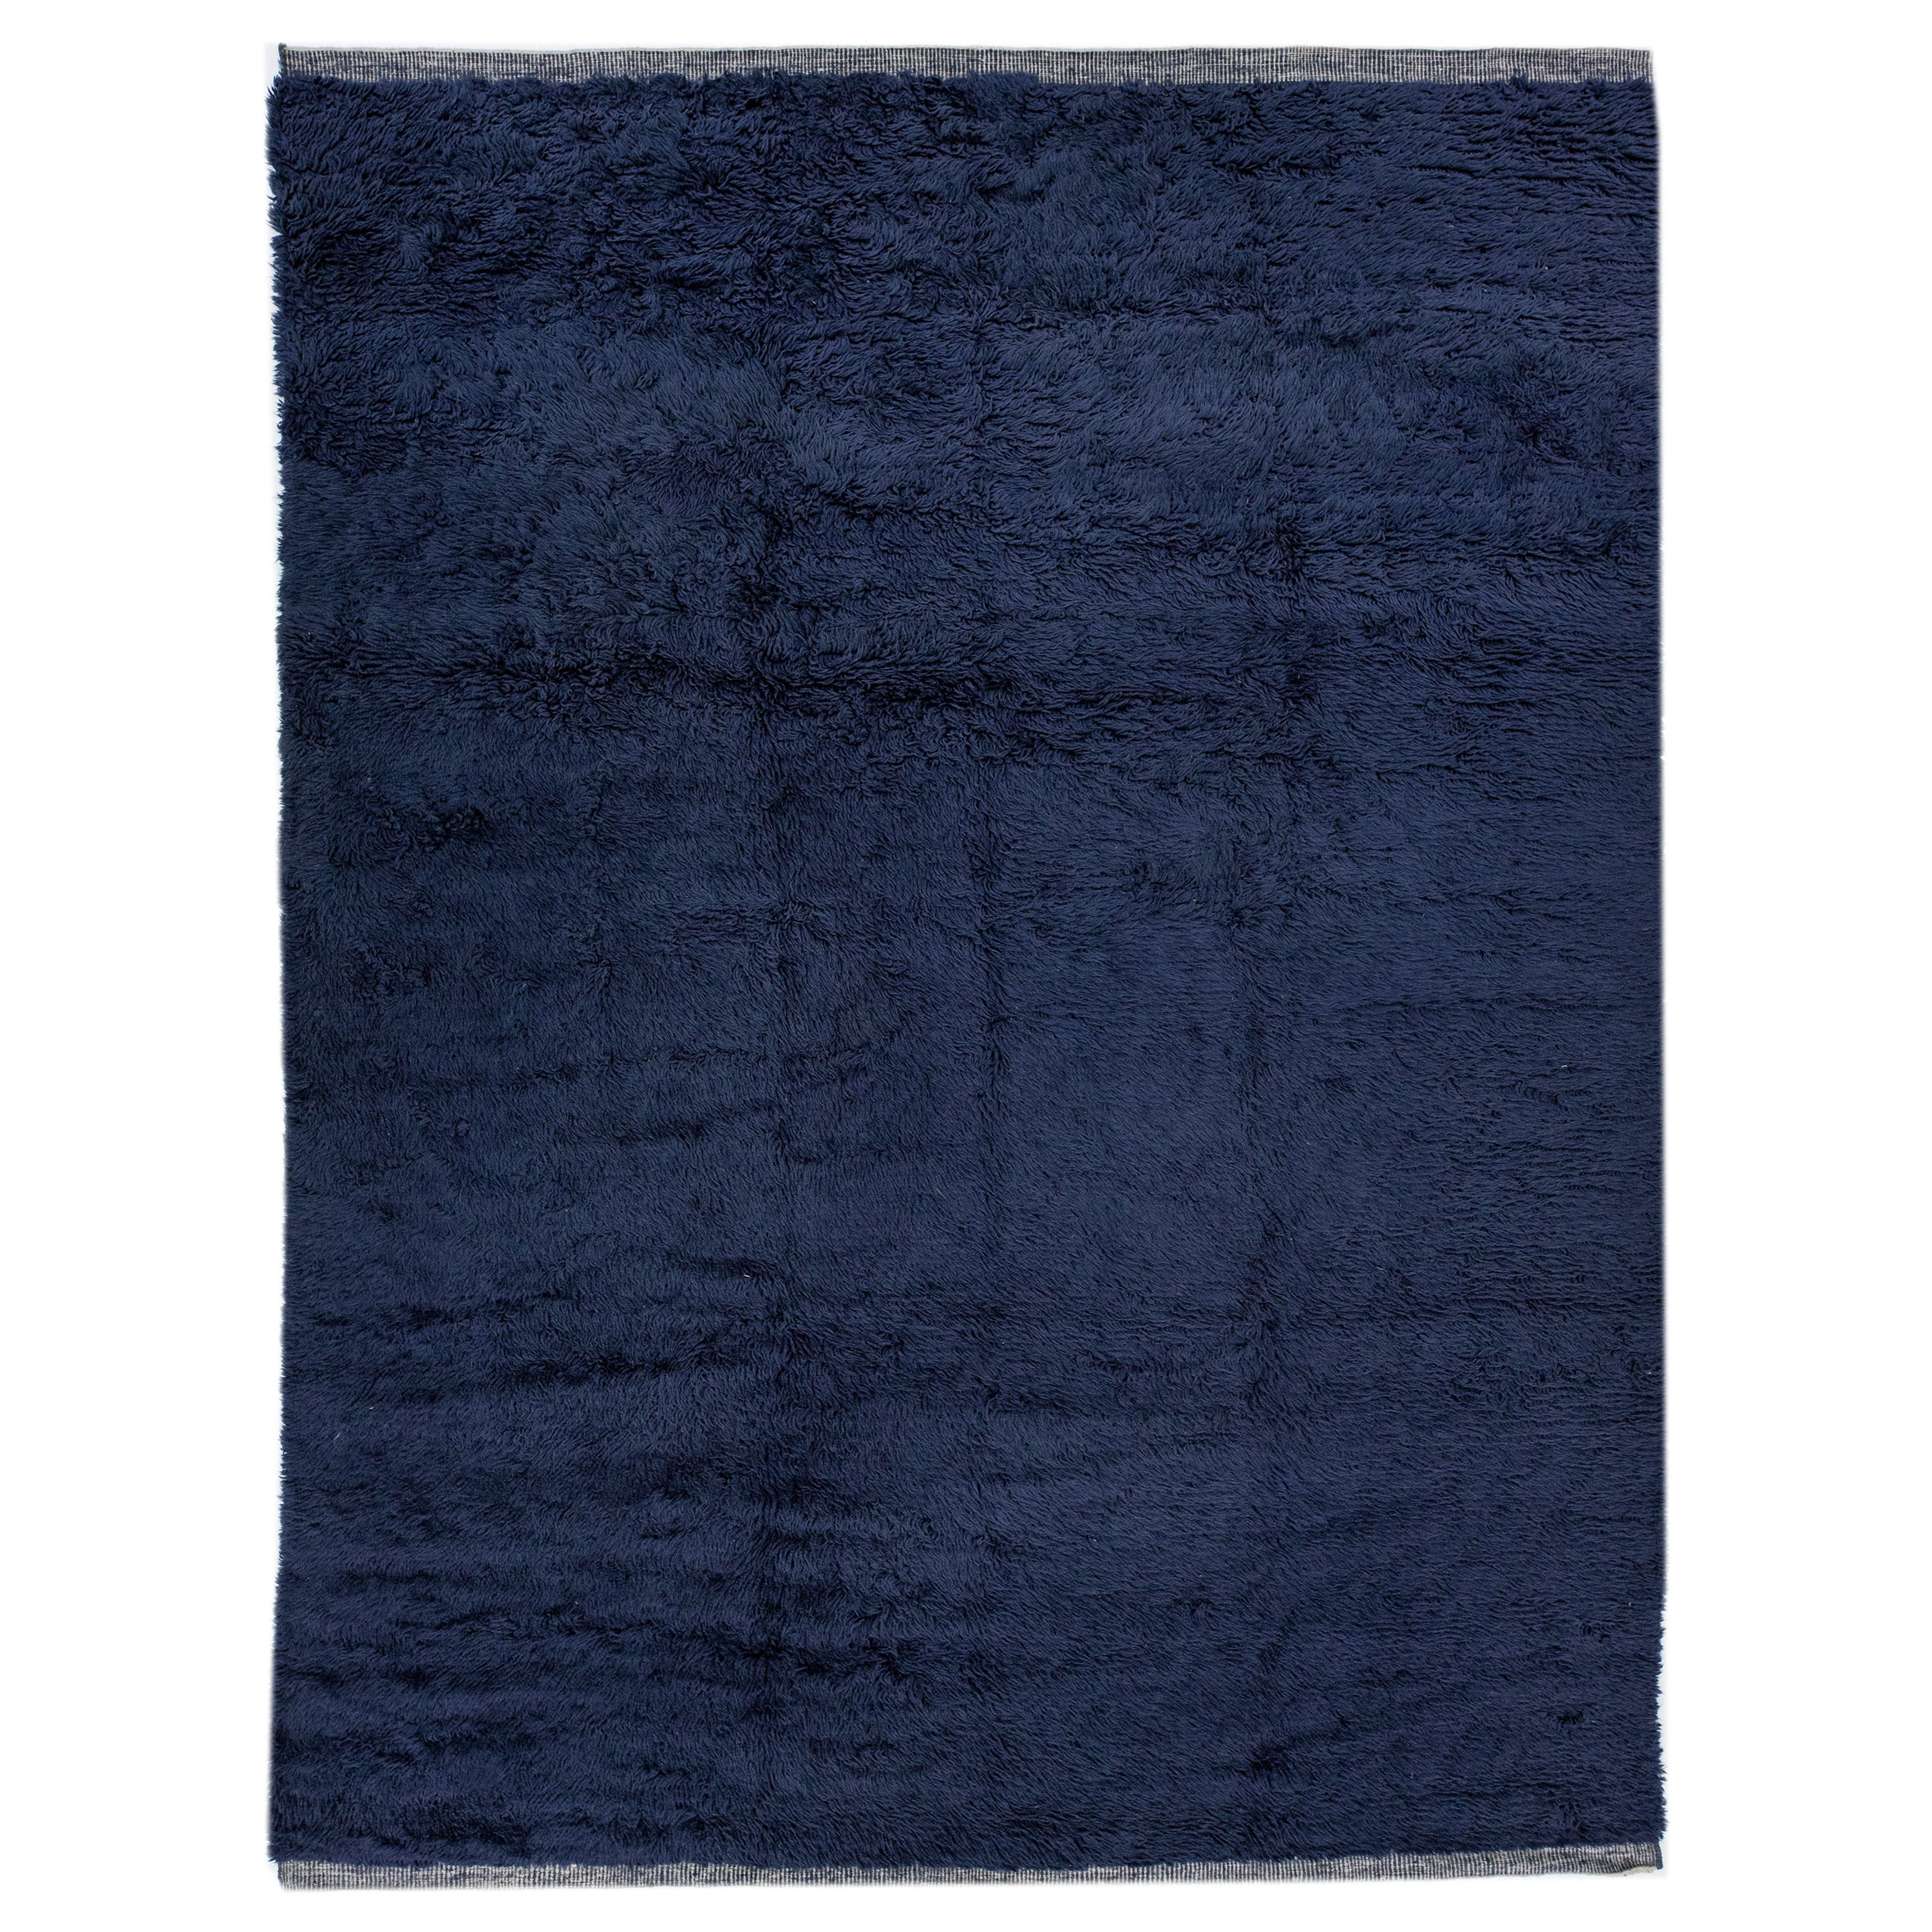 Modern Handmade Moroccan Style Wool Rug with Navy Blue Solid Field